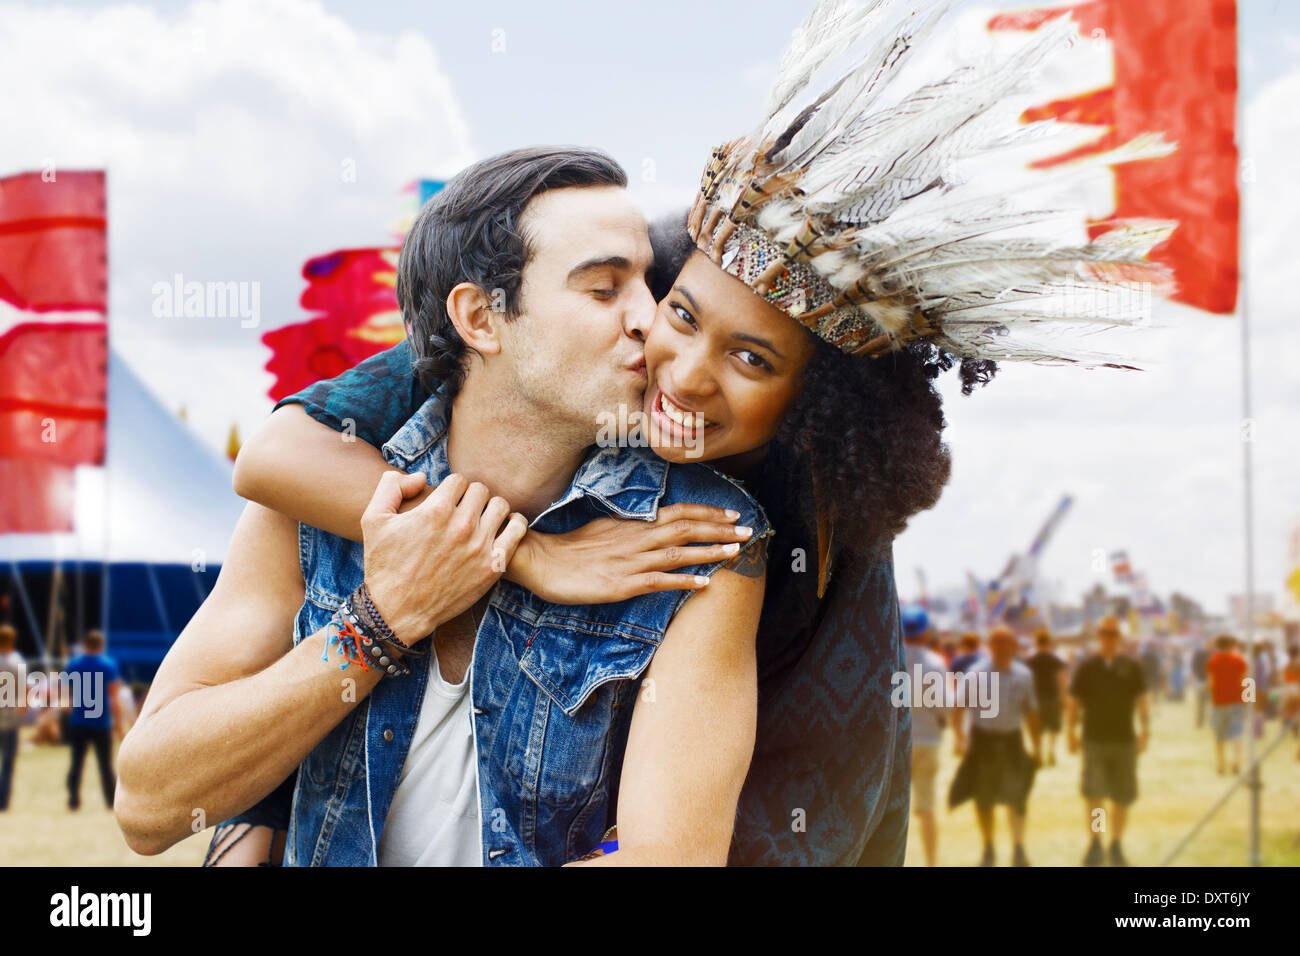 Couple kissing at music festival Stock Photo